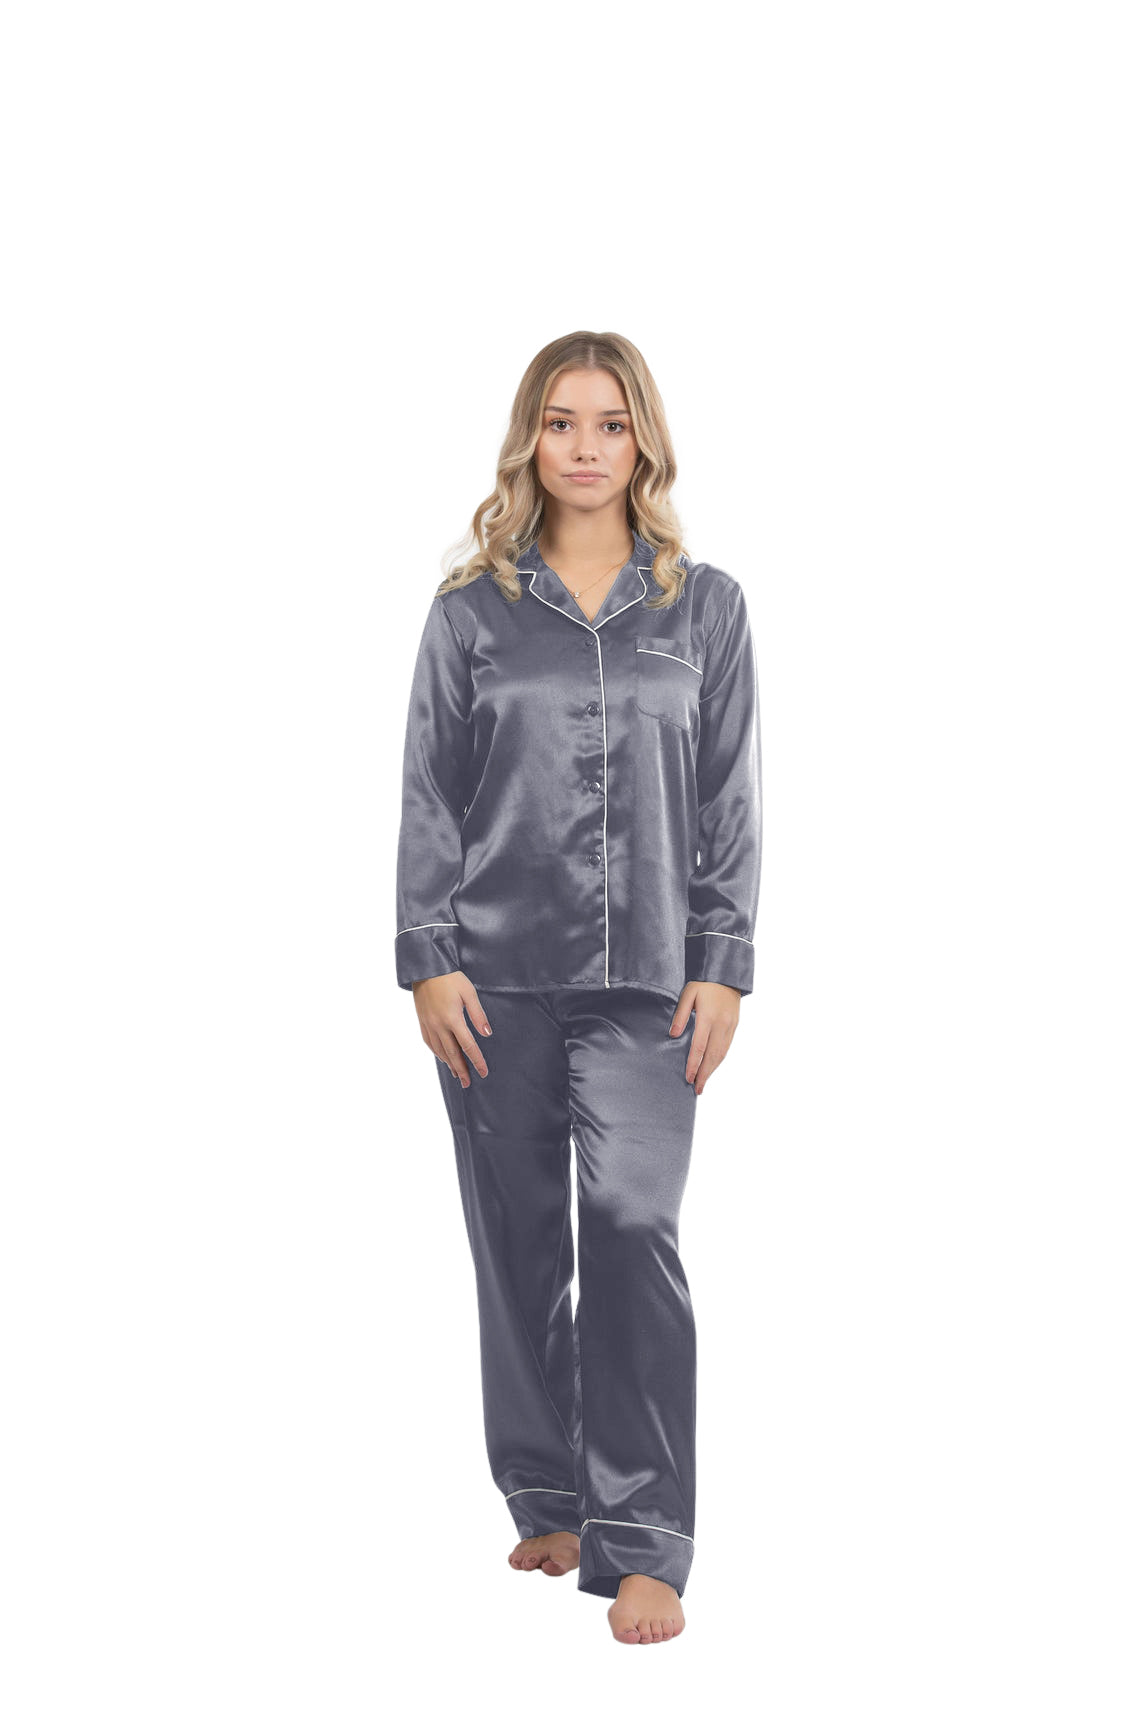 Satin Pajama Sets with contrast piping for women - Grey